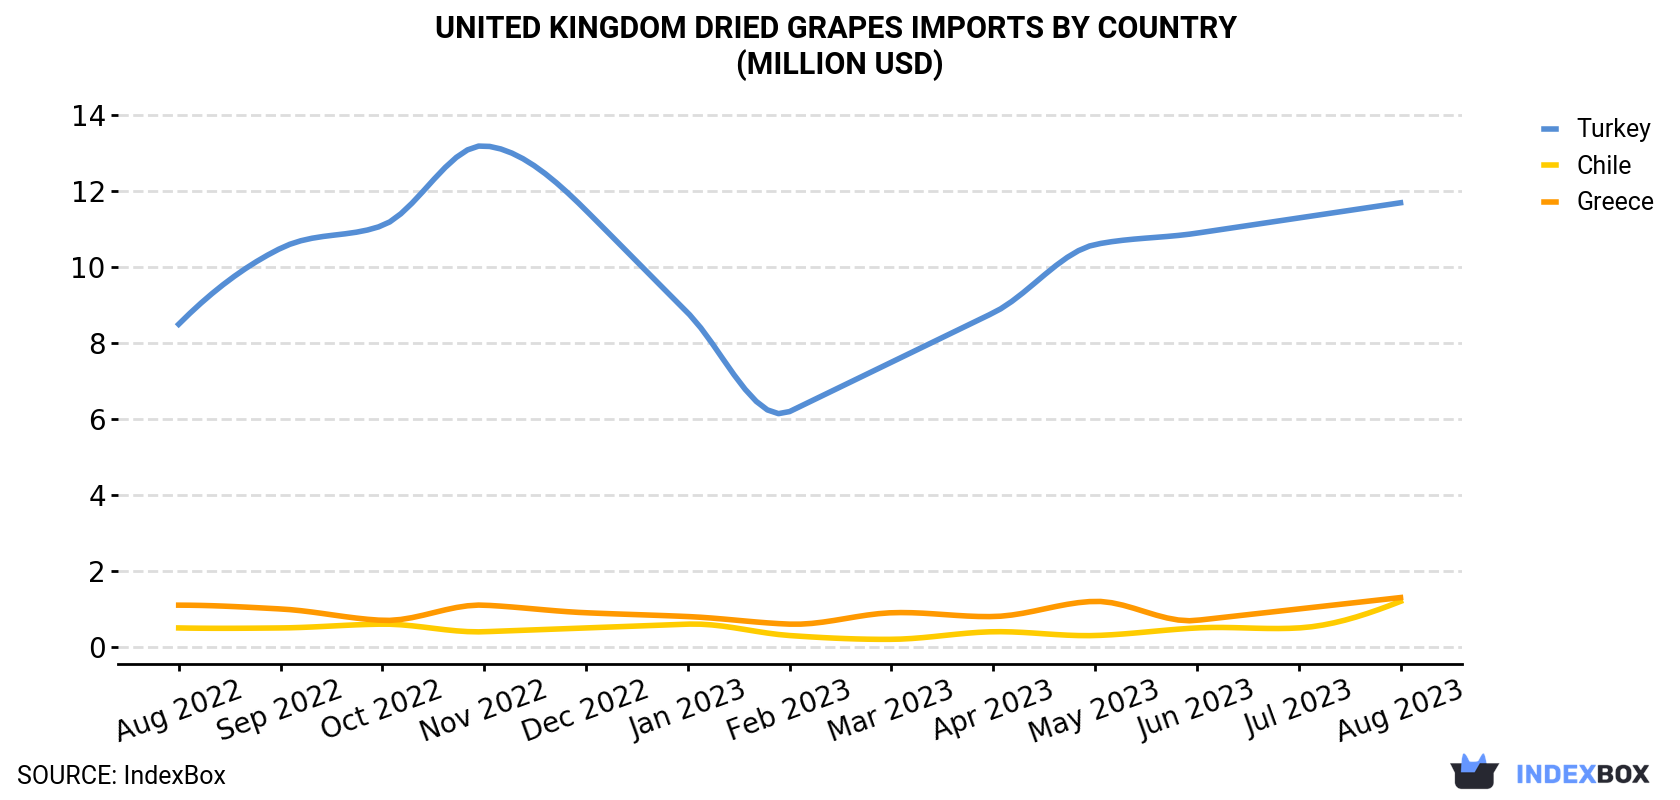 United Kingdom Dried Grapes Imports By Country (Million USD)